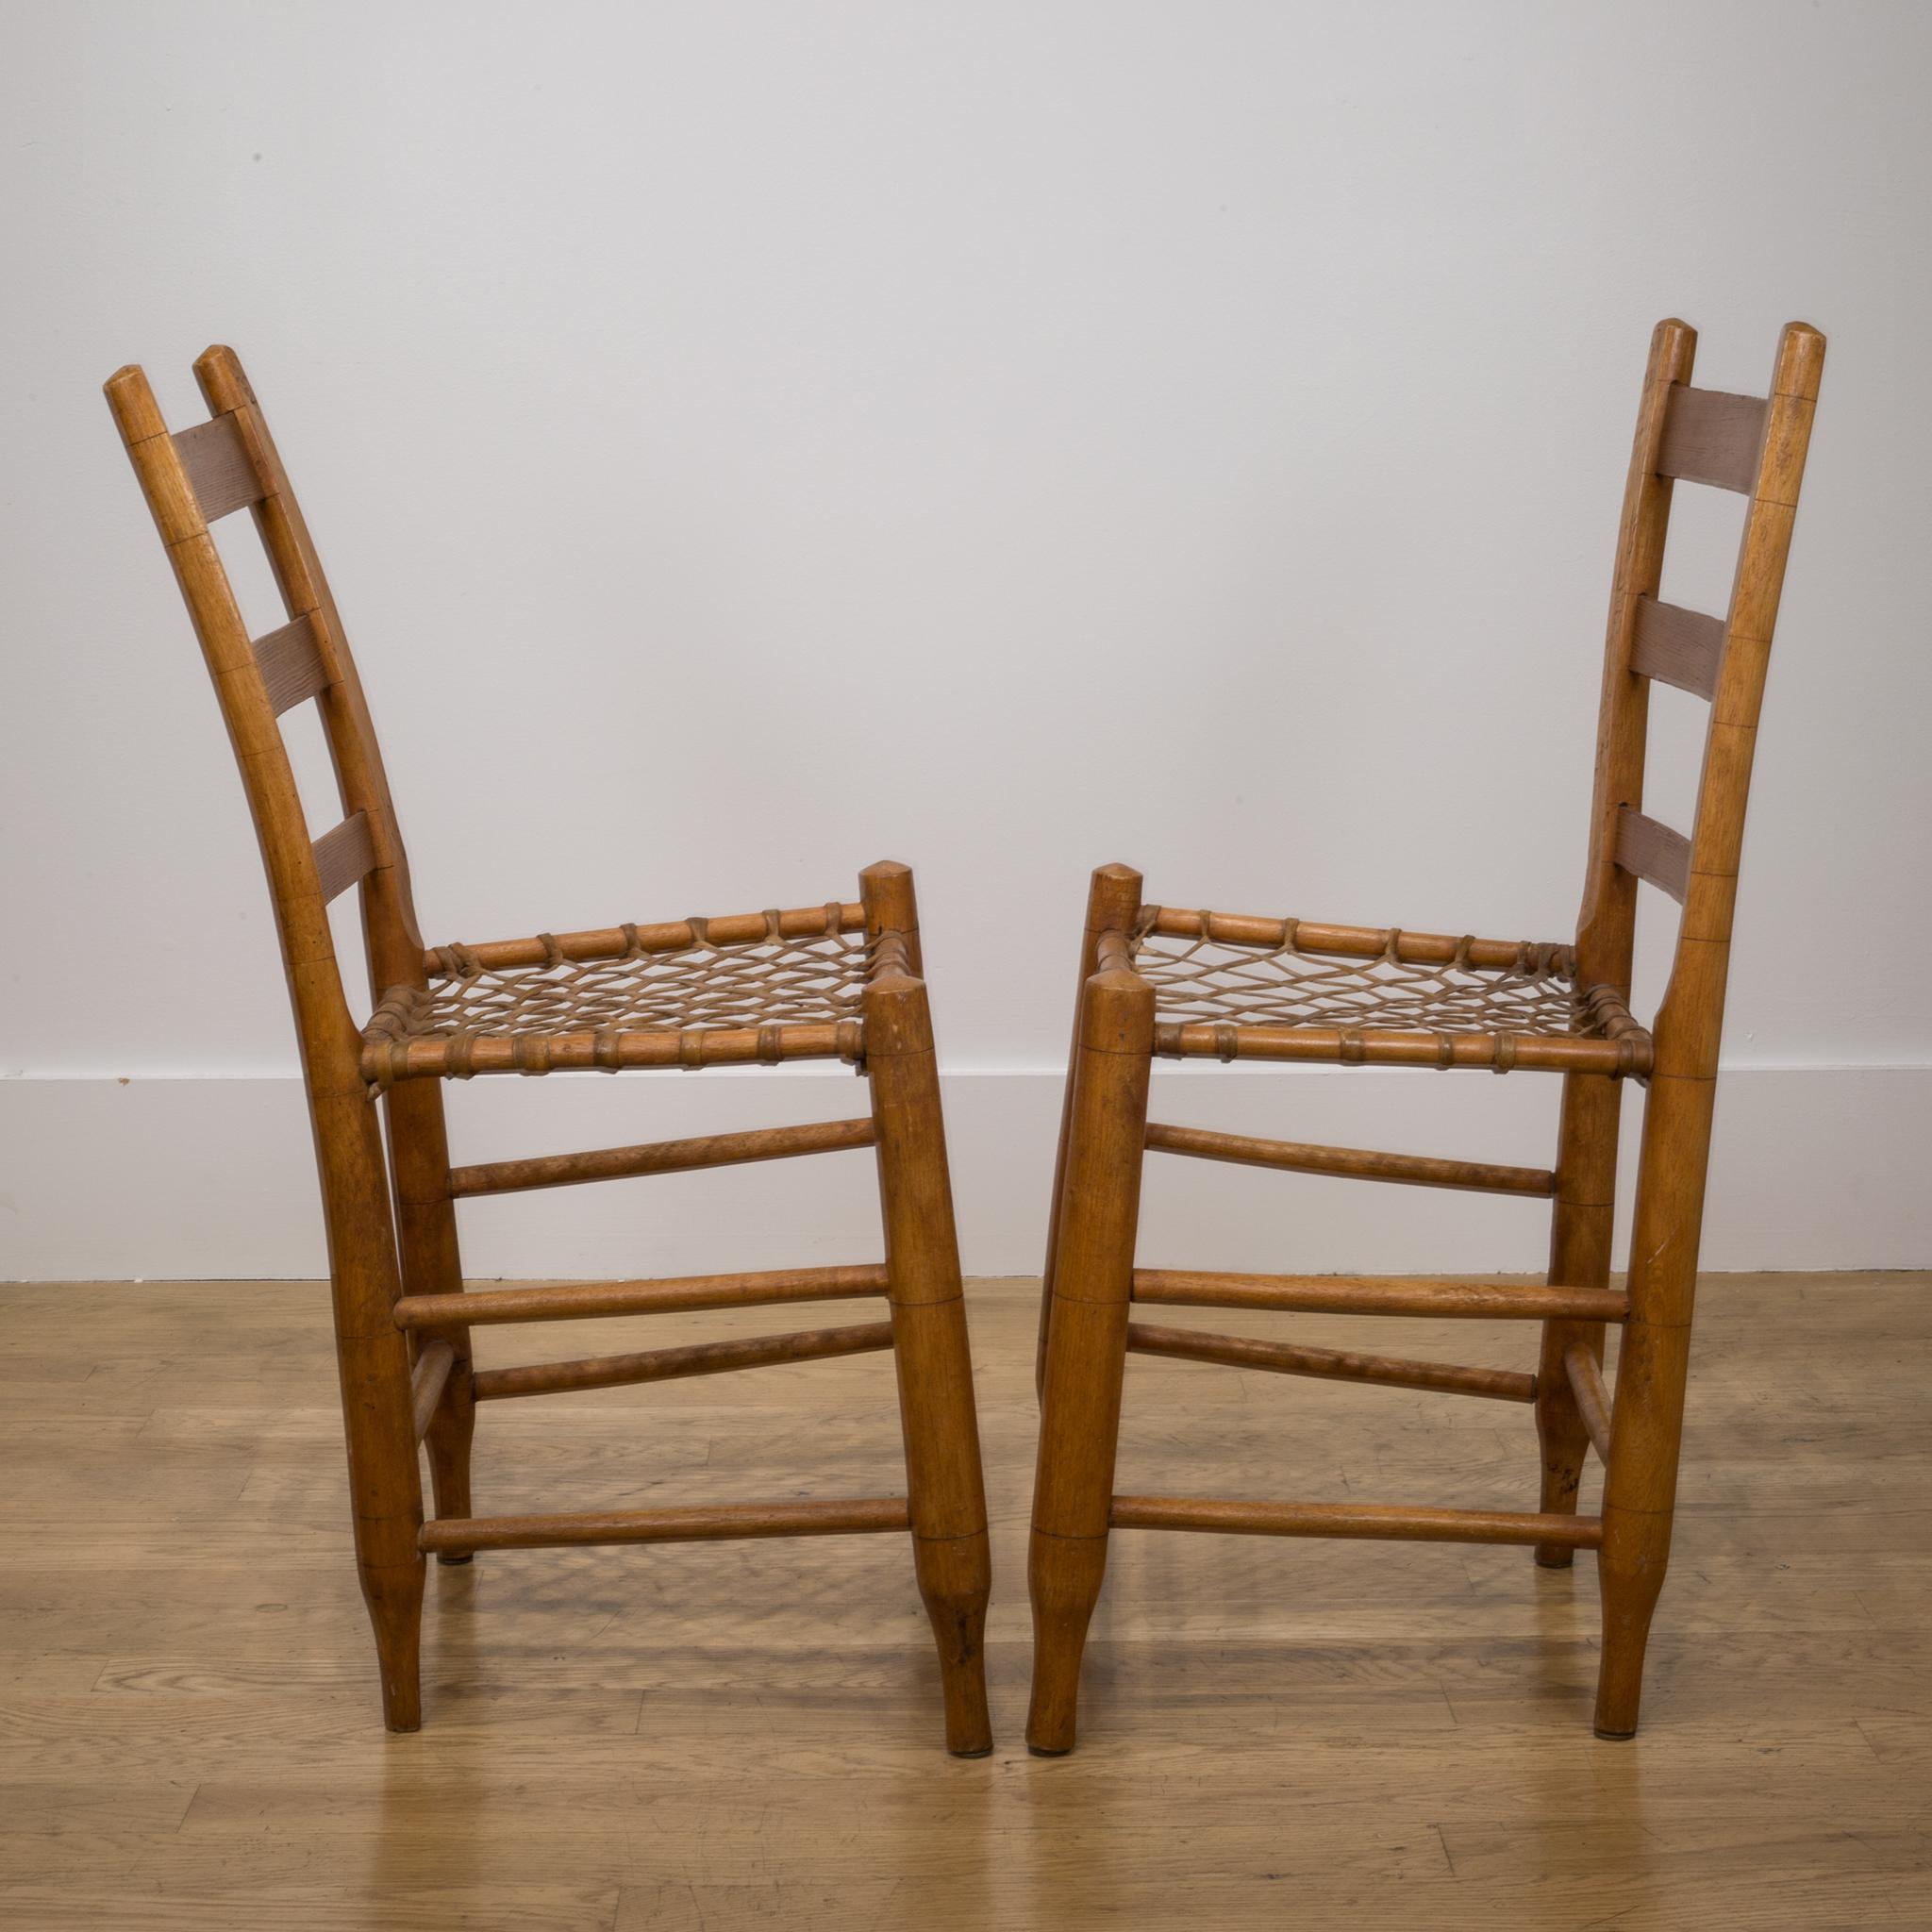 19th Century Rawhide Chairs from Historic Oregon Commune, circa 1856 6